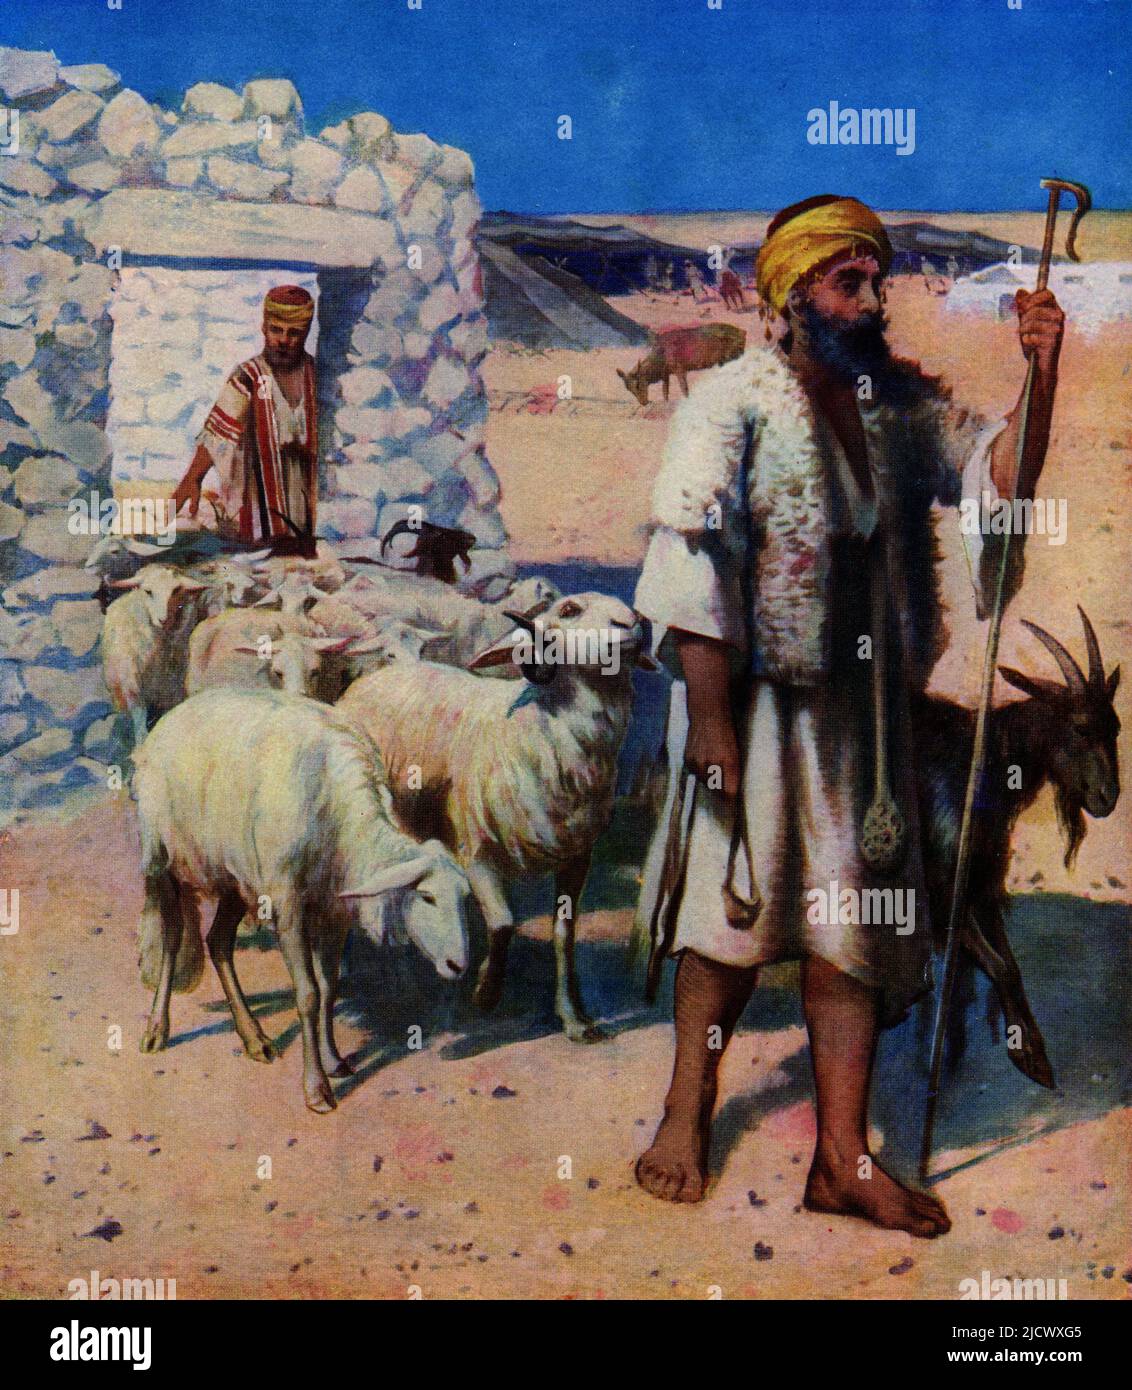 Illustration of a Middle Eastern tshepherd. The Original caption reads: the shepherd is holding the home-made native sling in his right hand, and the staff or crook in his felt, whilst attached to his girdle is the oak club or 'rod', a formidable werapon, to protect the flock from wild beasts, bedaween, and brigands. He wears the white kamise, and over it the reversible sheepskin coat. Two sheepfolds are shown,. a bedaween camp in the distance, and a hind in the centre, standing over a covered aqueduct. Quiver magazine 1913. Stock Photo